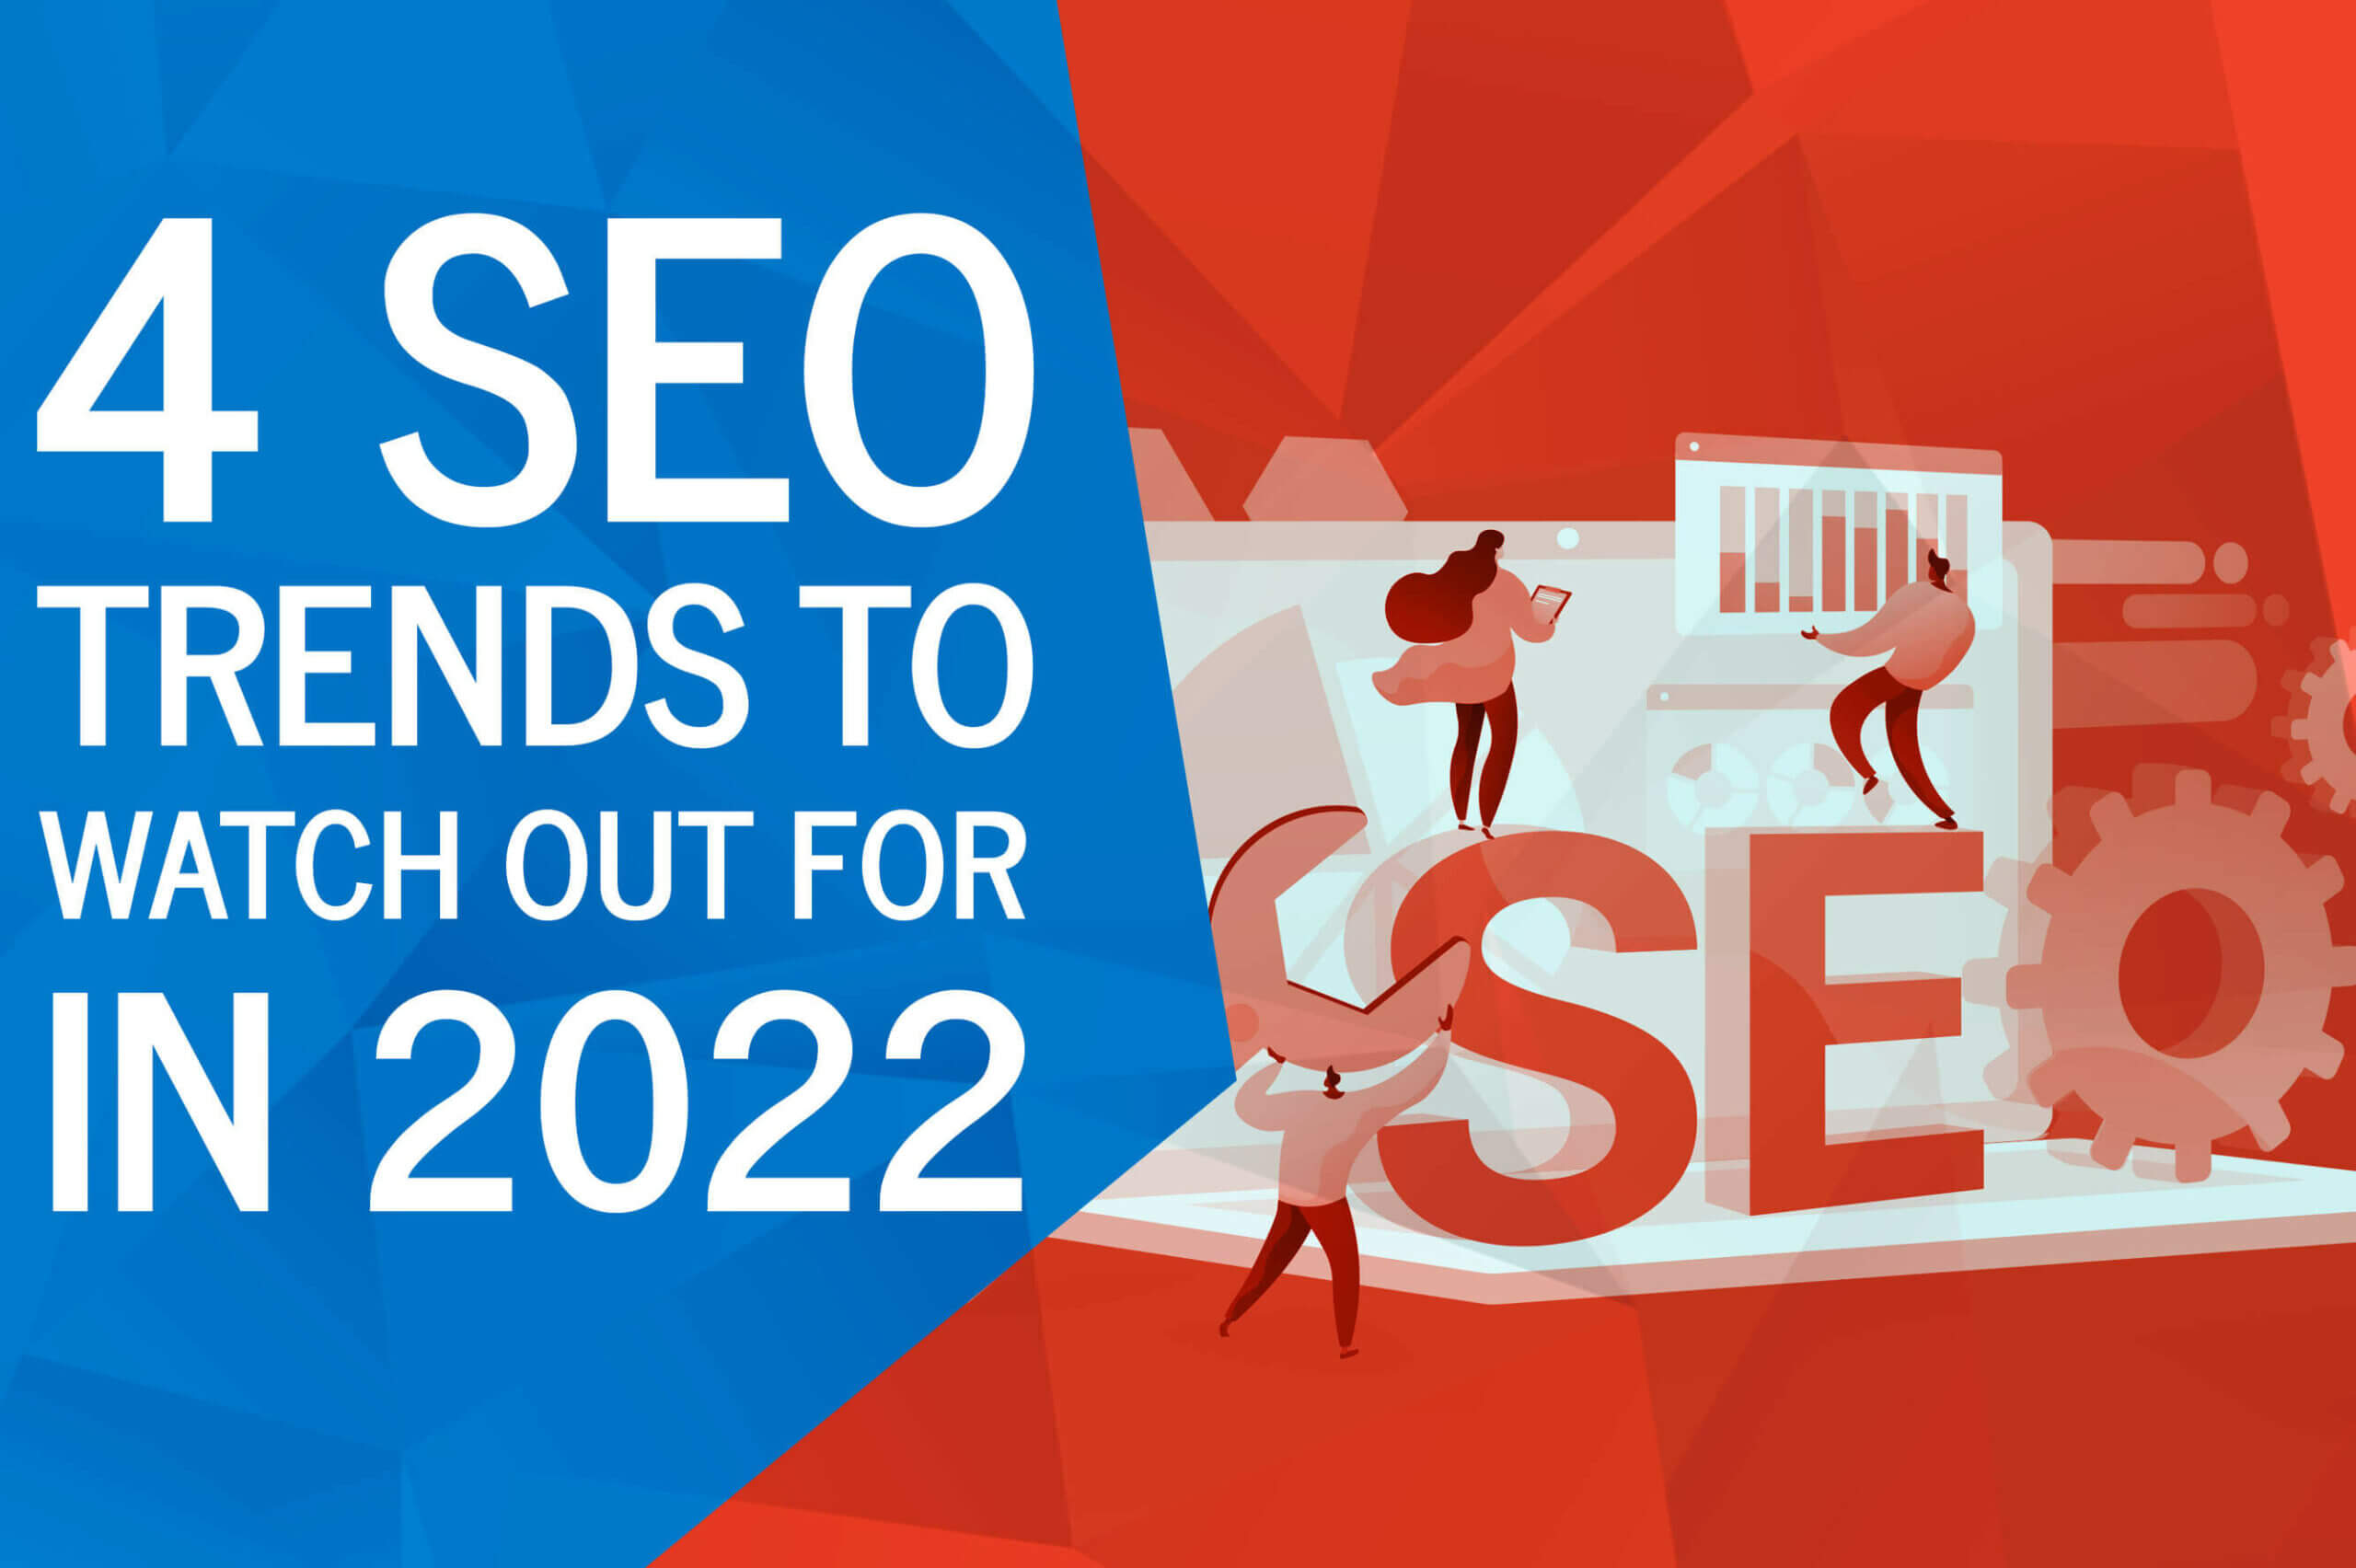 4 SEO Trends to Watch Out for in 2022